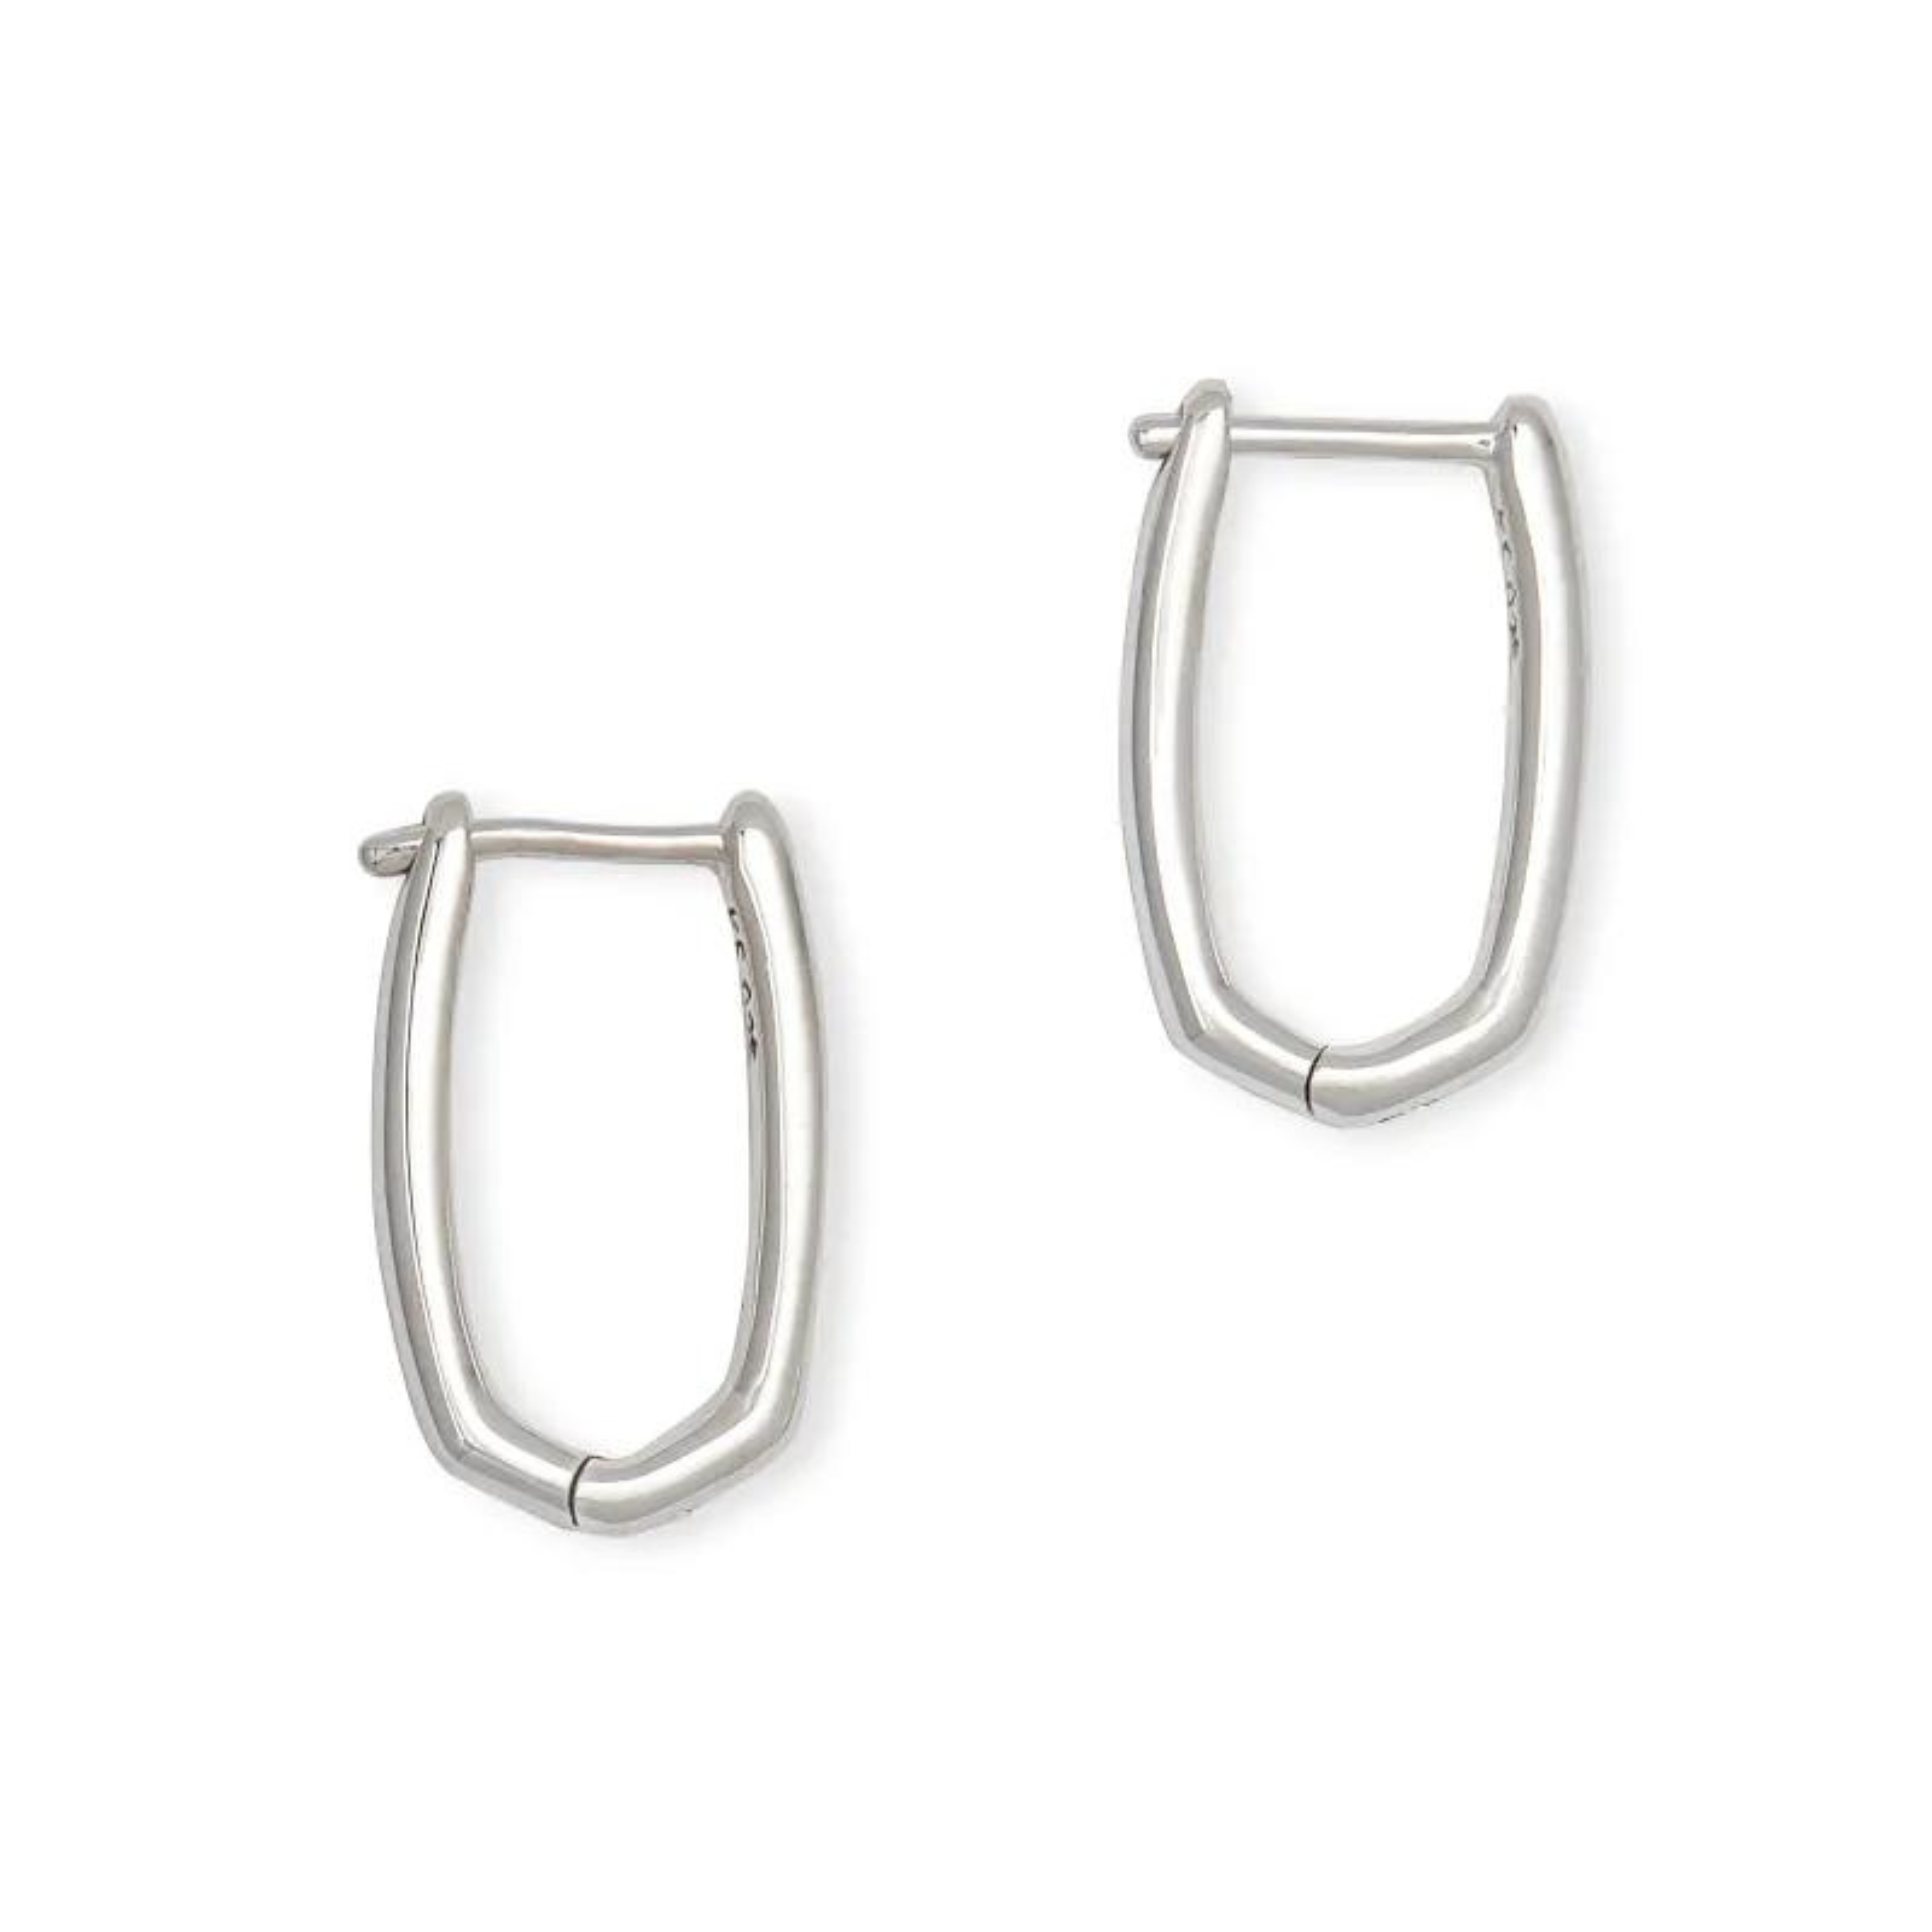 Thin, silver hoop earrings pictured on a white background. 